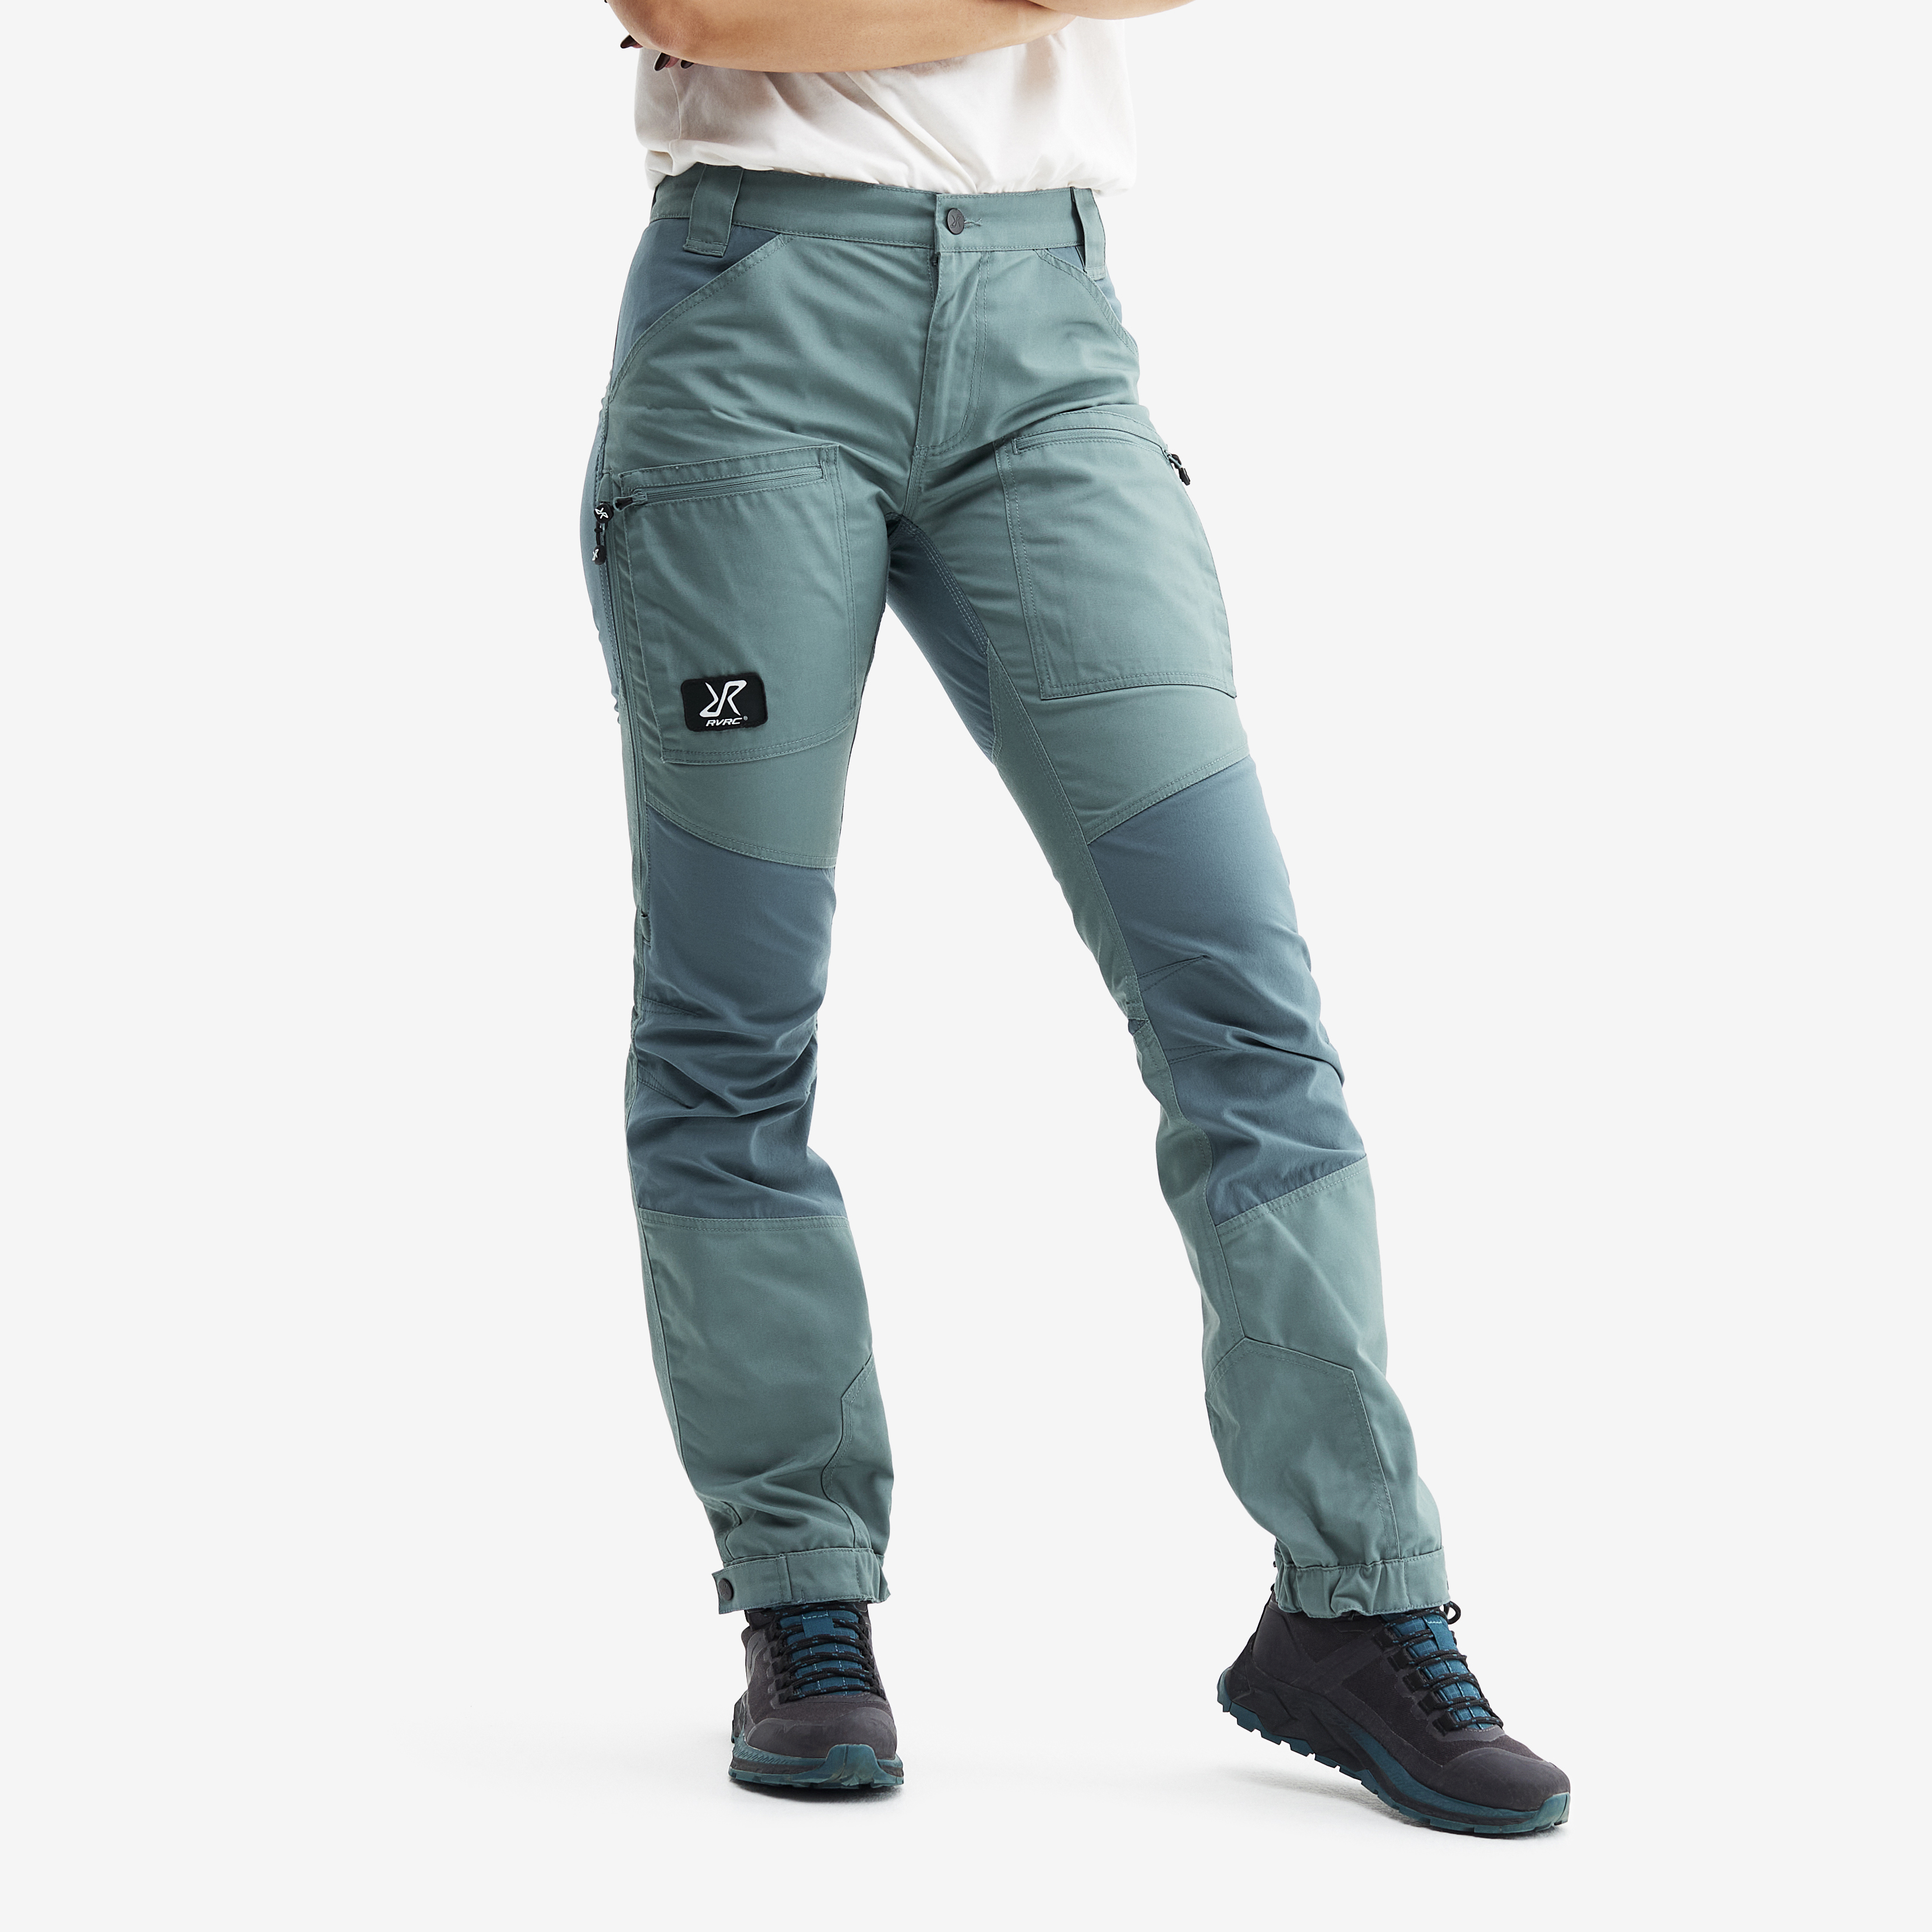 Nordwand Pro hiking trousers for women in blue